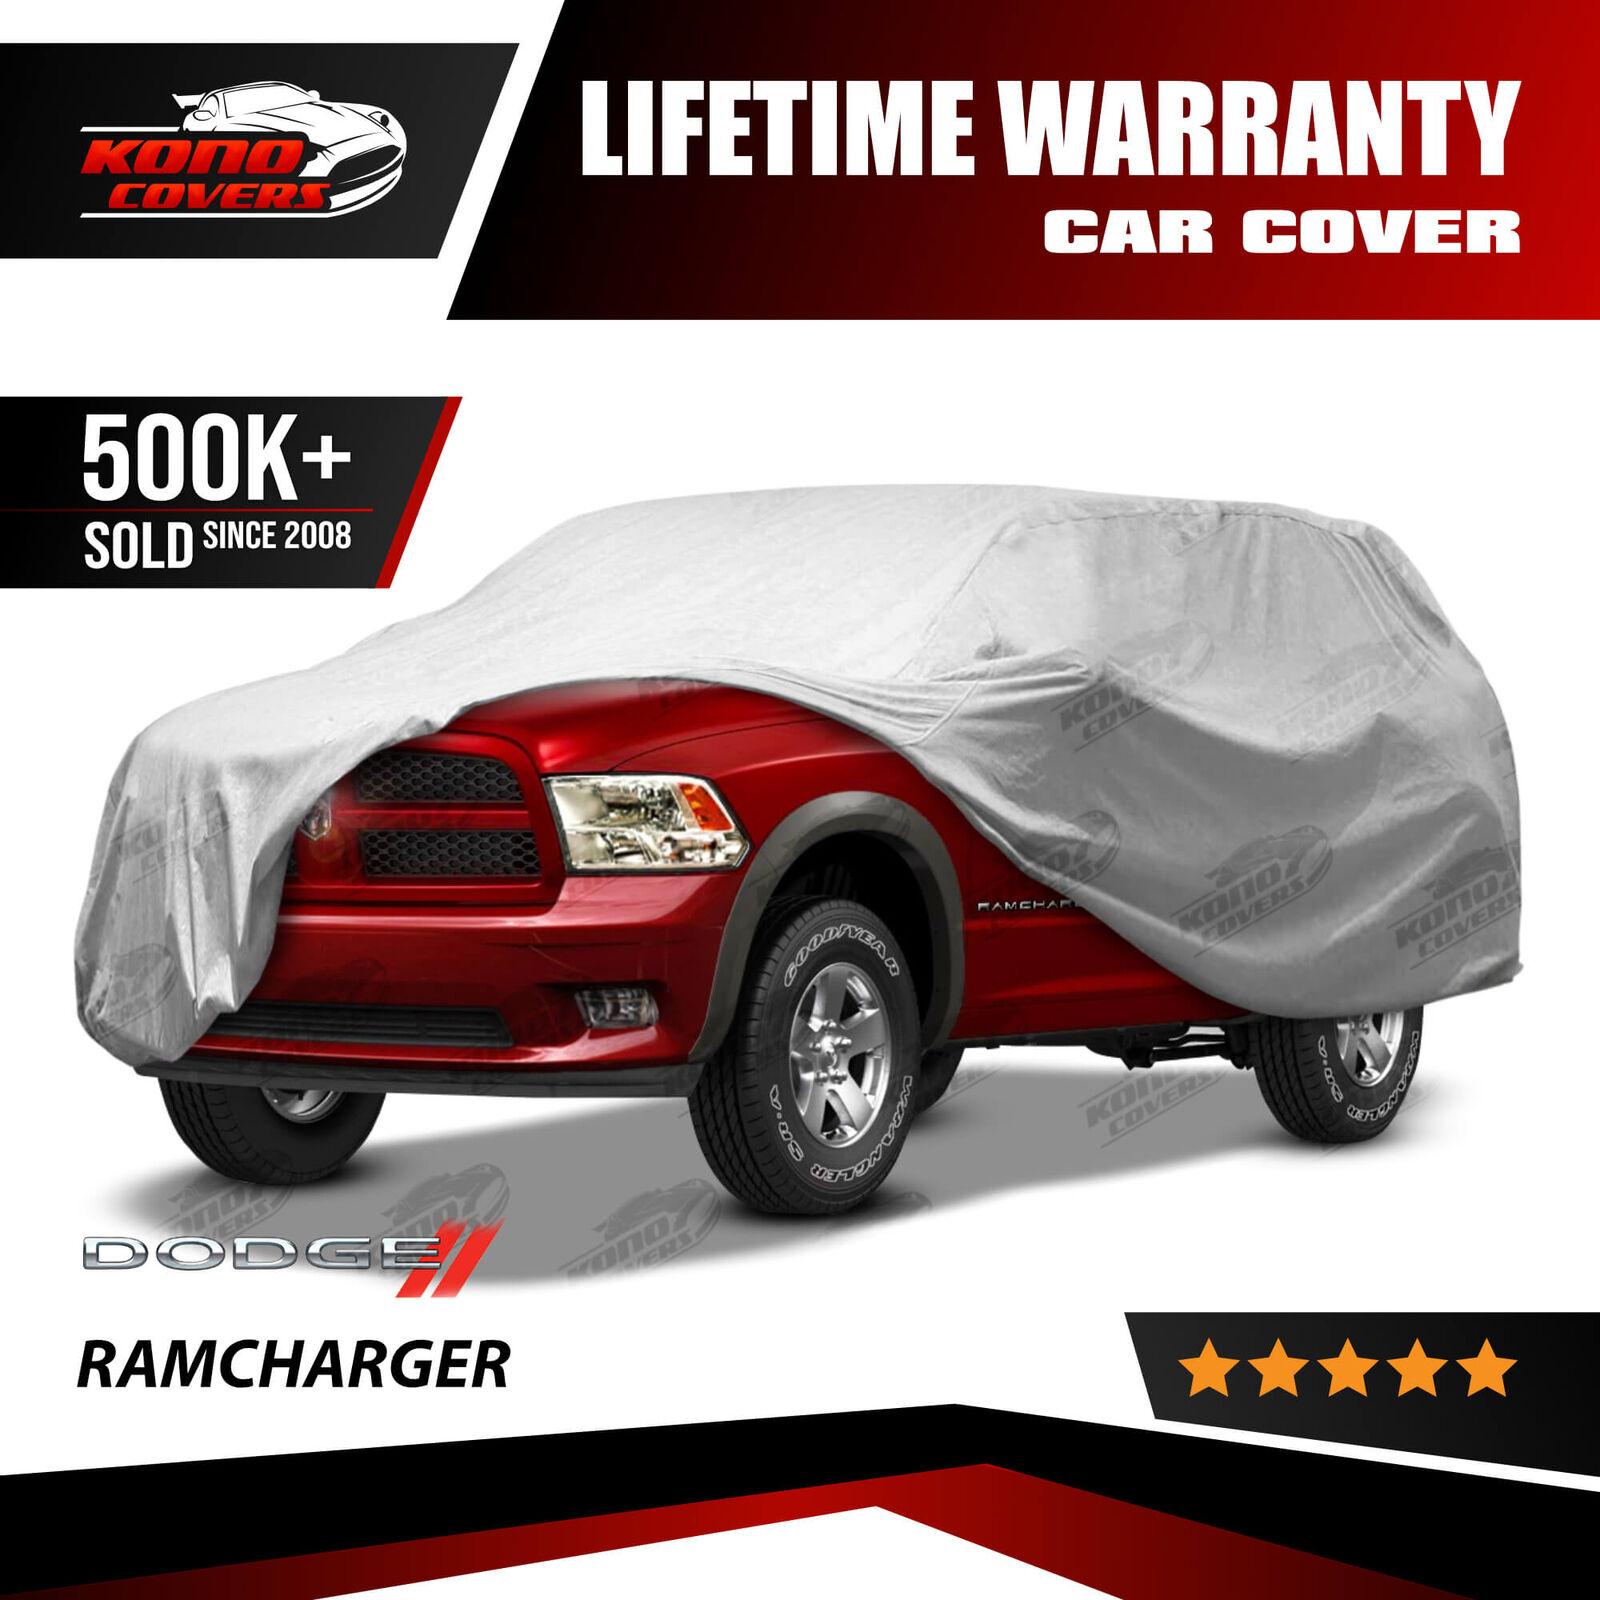 Dodge Ramcharger 4 Layer Car Cover 1983 1984 1985 1986 1987 1988 1989 1990